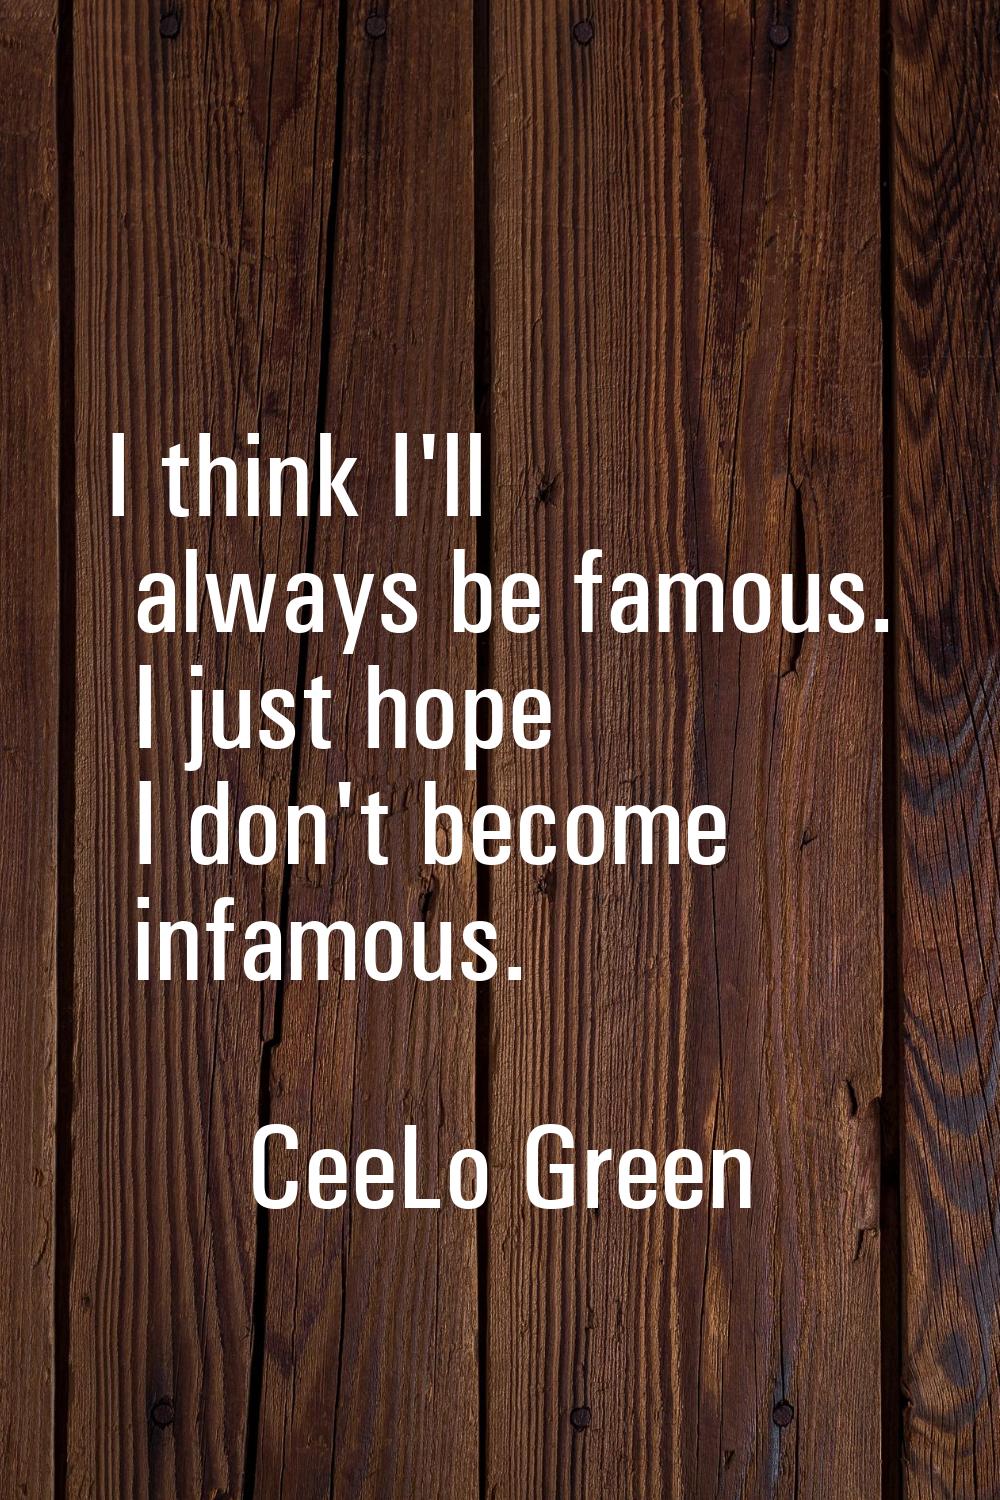 I think I'll always be famous. I just hope I don't become infamous.